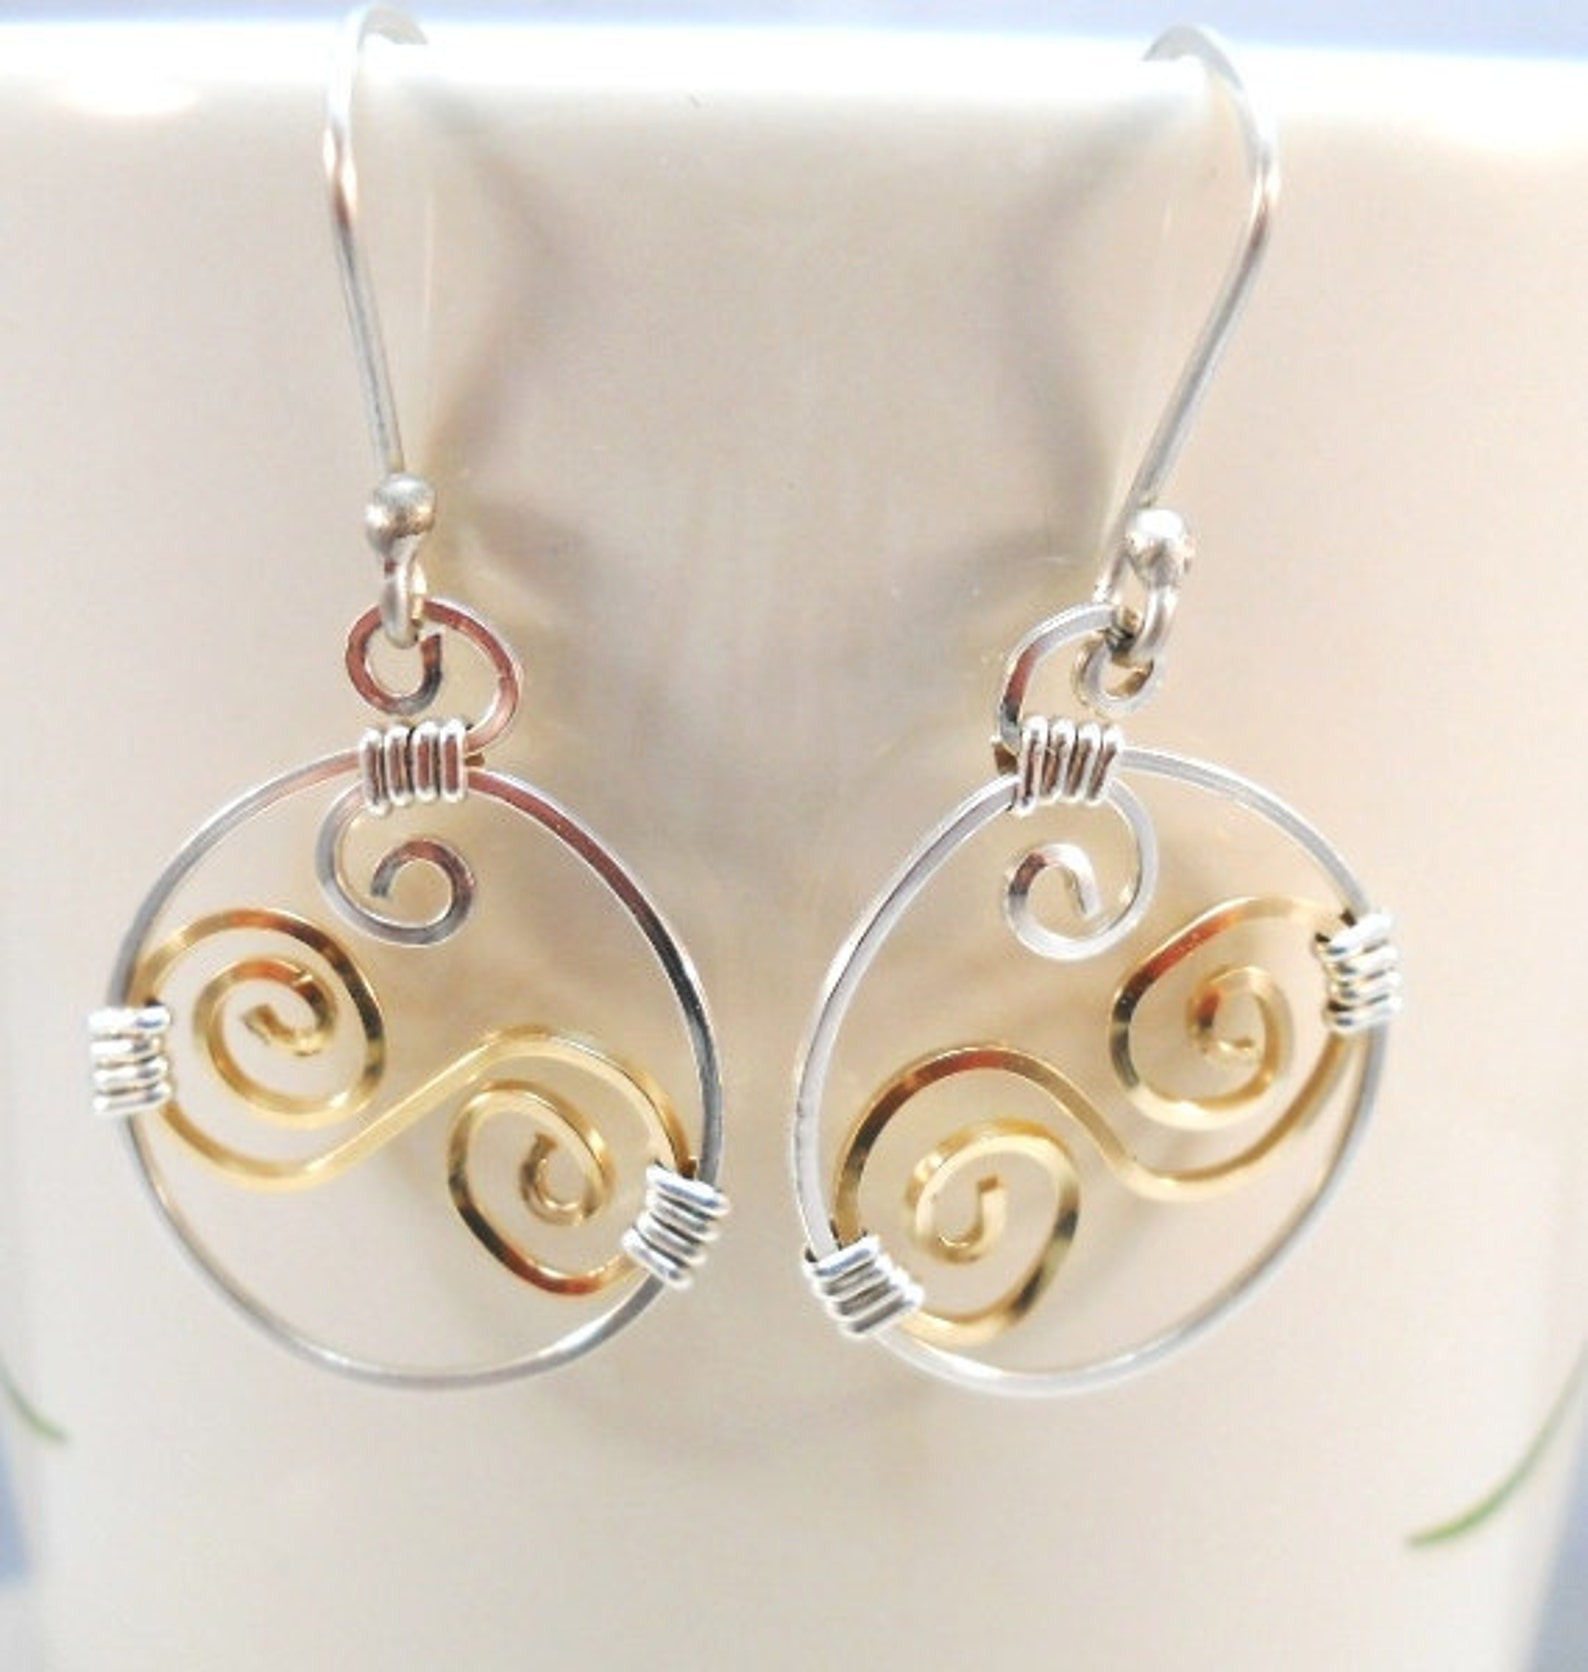 Wire Wrap Earrings Gold And Sterling Silver Jewelry Dangle Drop Circle